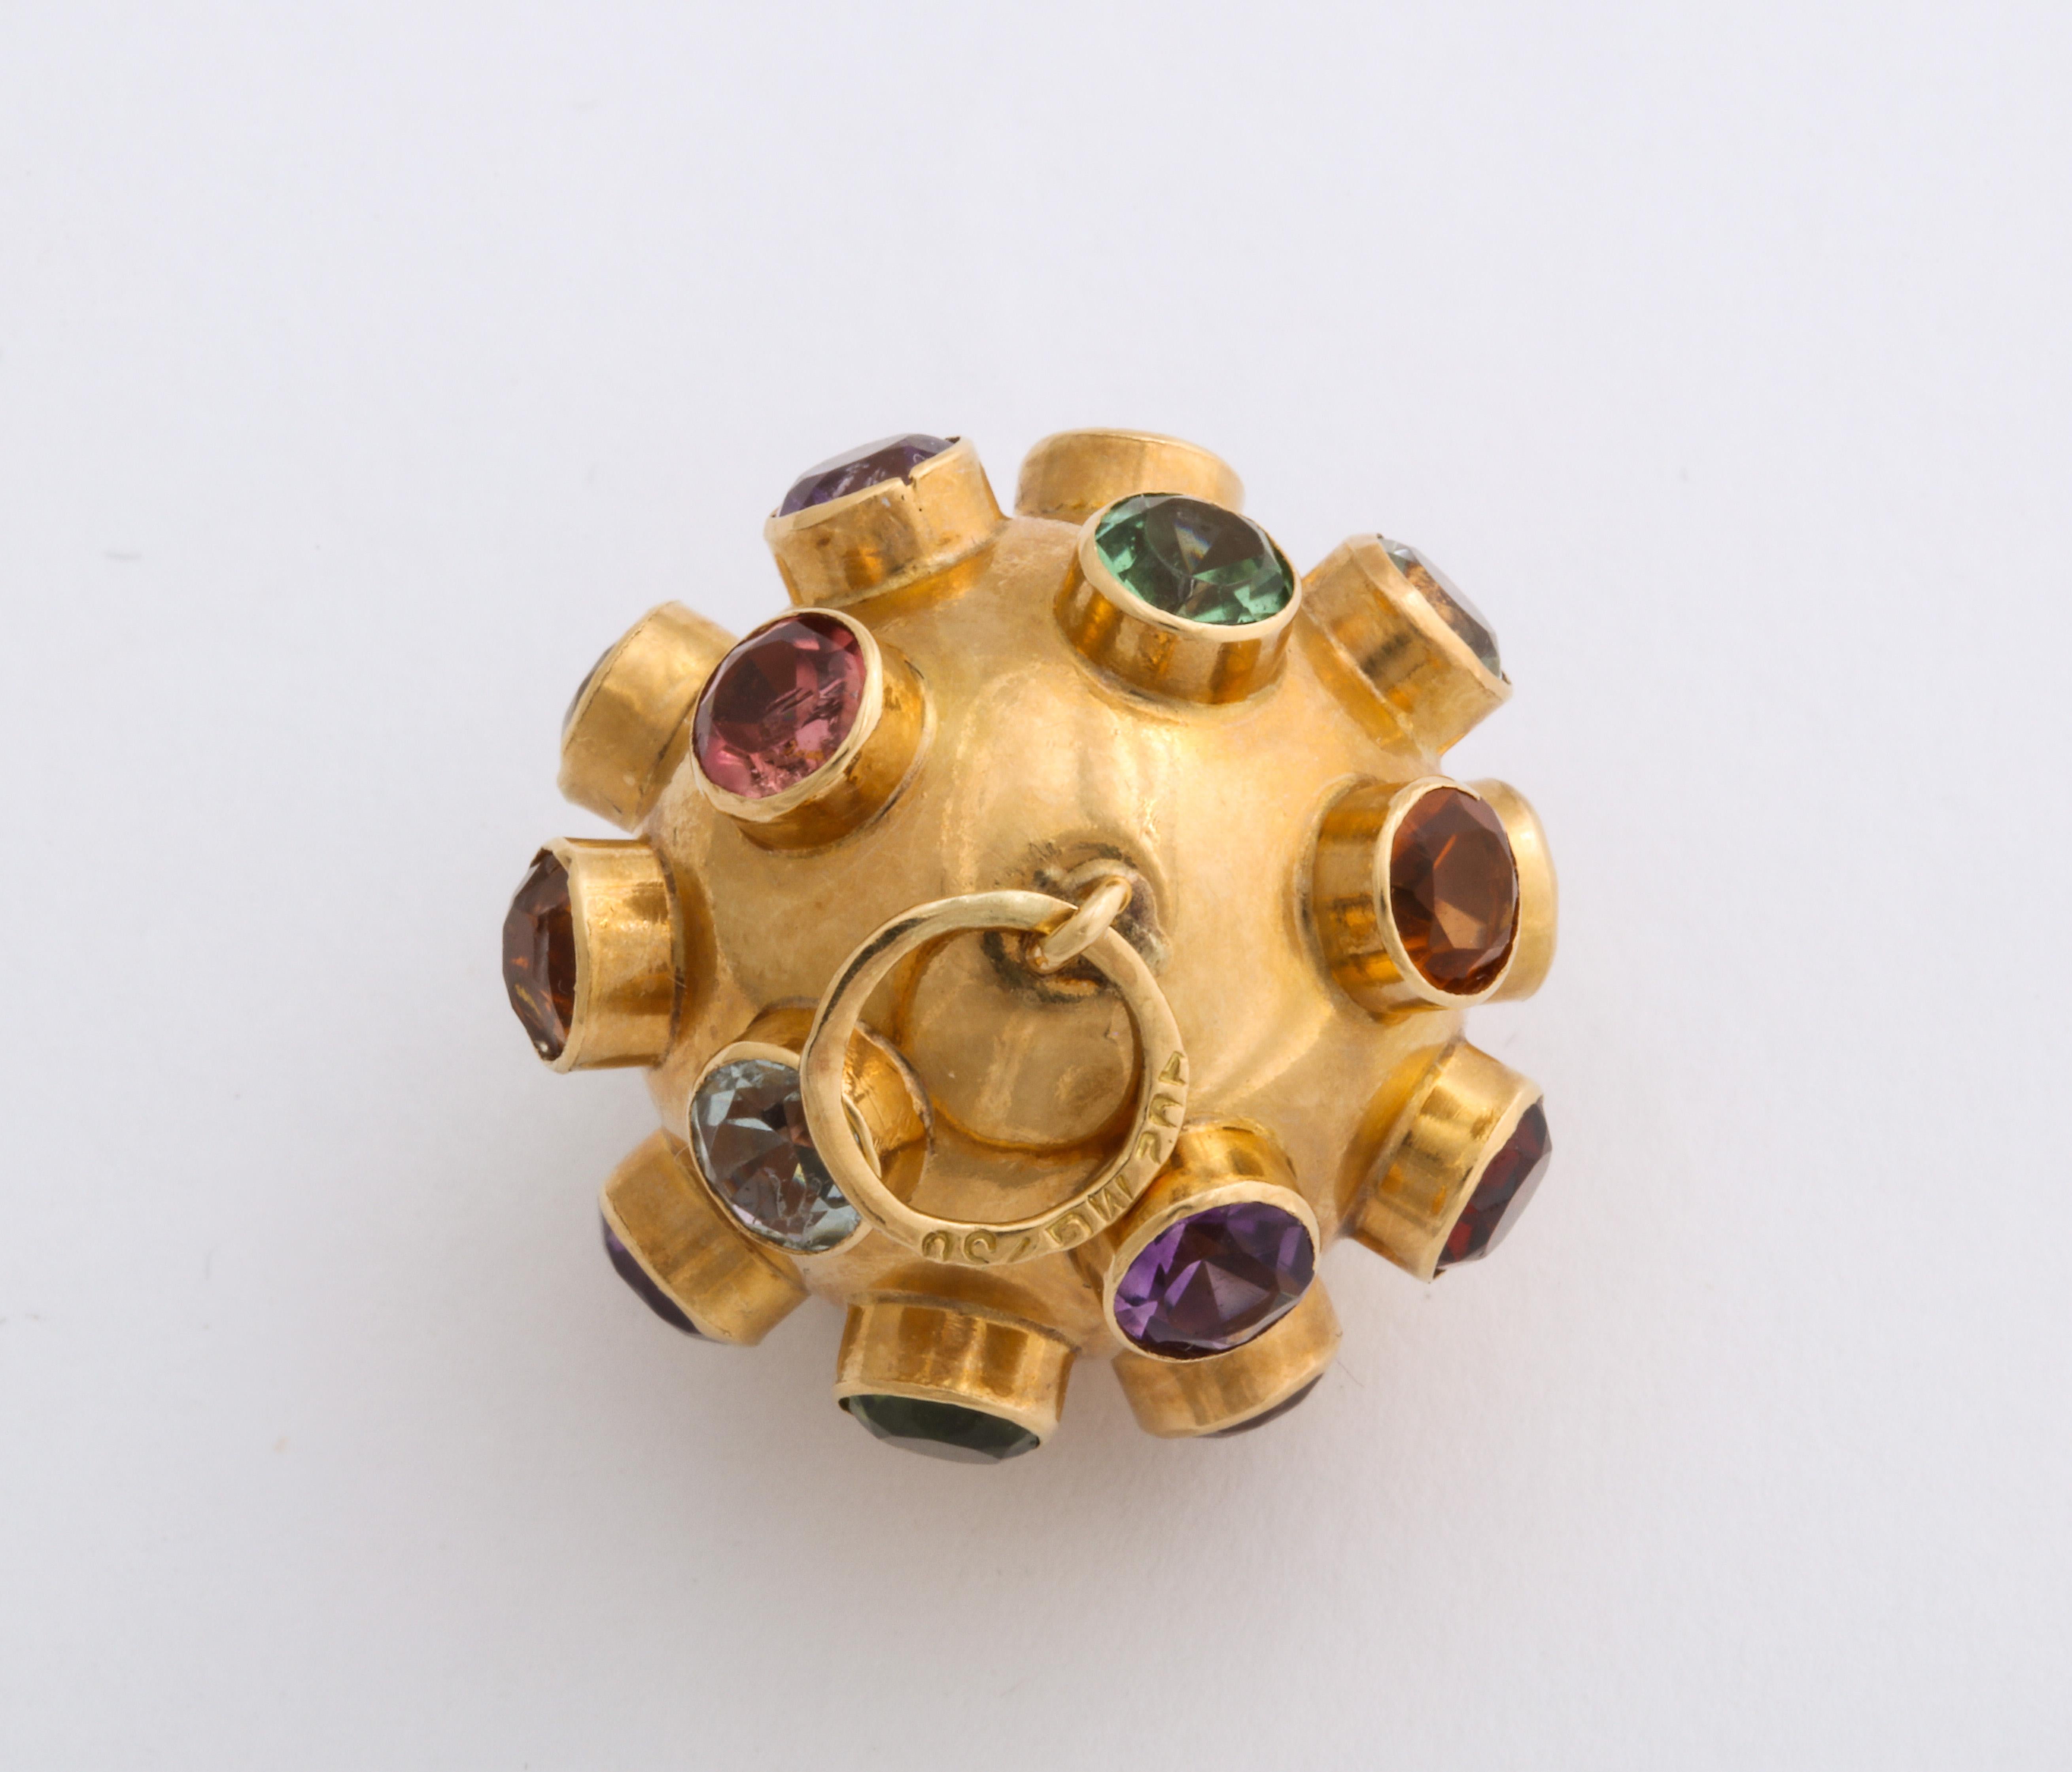 In 14 Kt, this pendant or charm, a gem studded ball, is set with colors true to their calling, garnet, aquamarine, citrine, amethyst, sapphire and green tourmaline. The stones are deeply set, each in their own collet. Sputnik, the first artificial